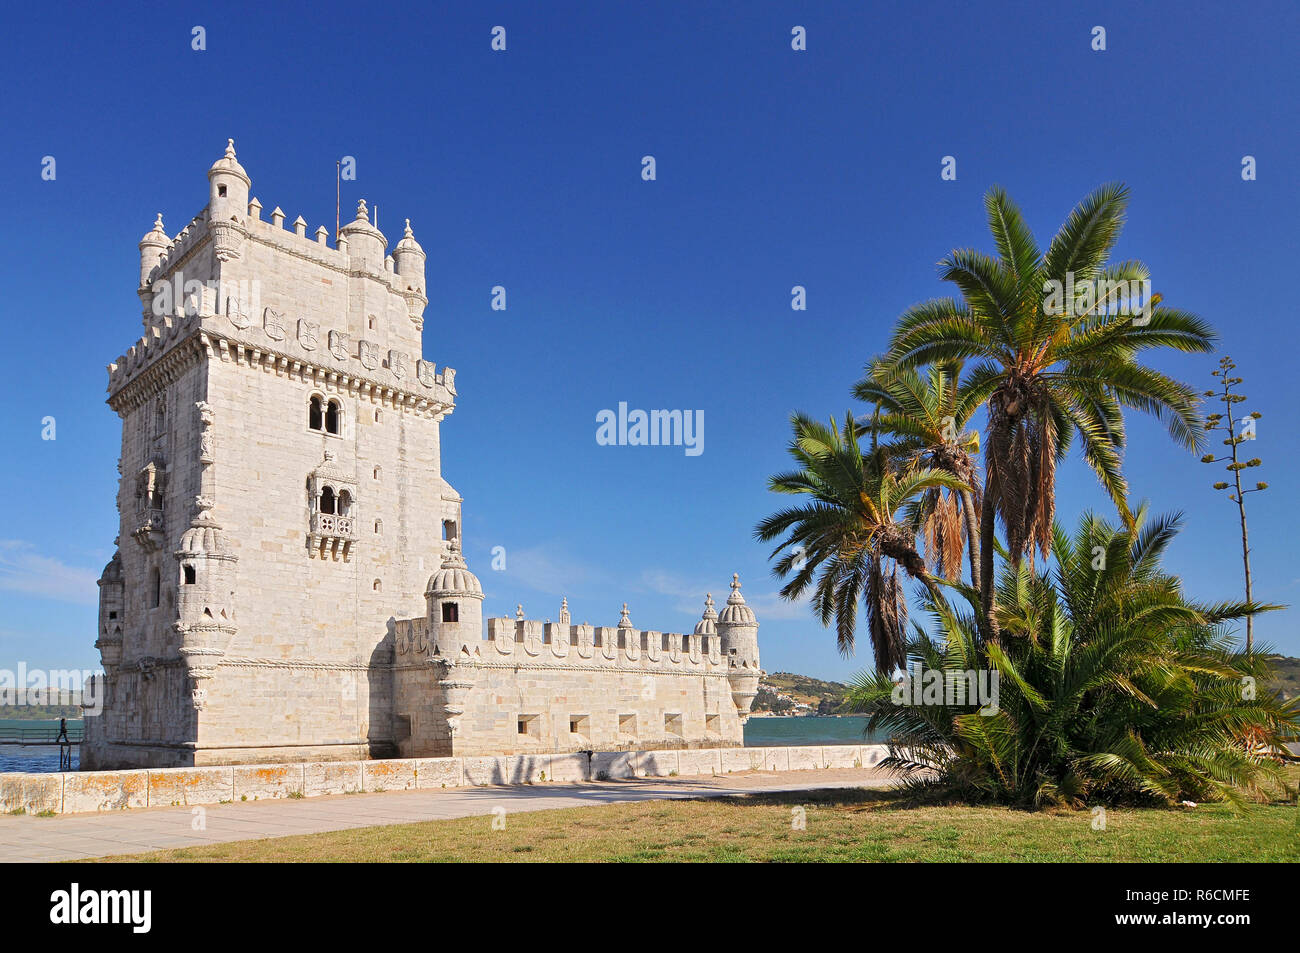 Belem Tower, Fortified Tower Located In The Civil Parish Of Santa Maria De Belem In Lisbon, Portugal Stock Photo